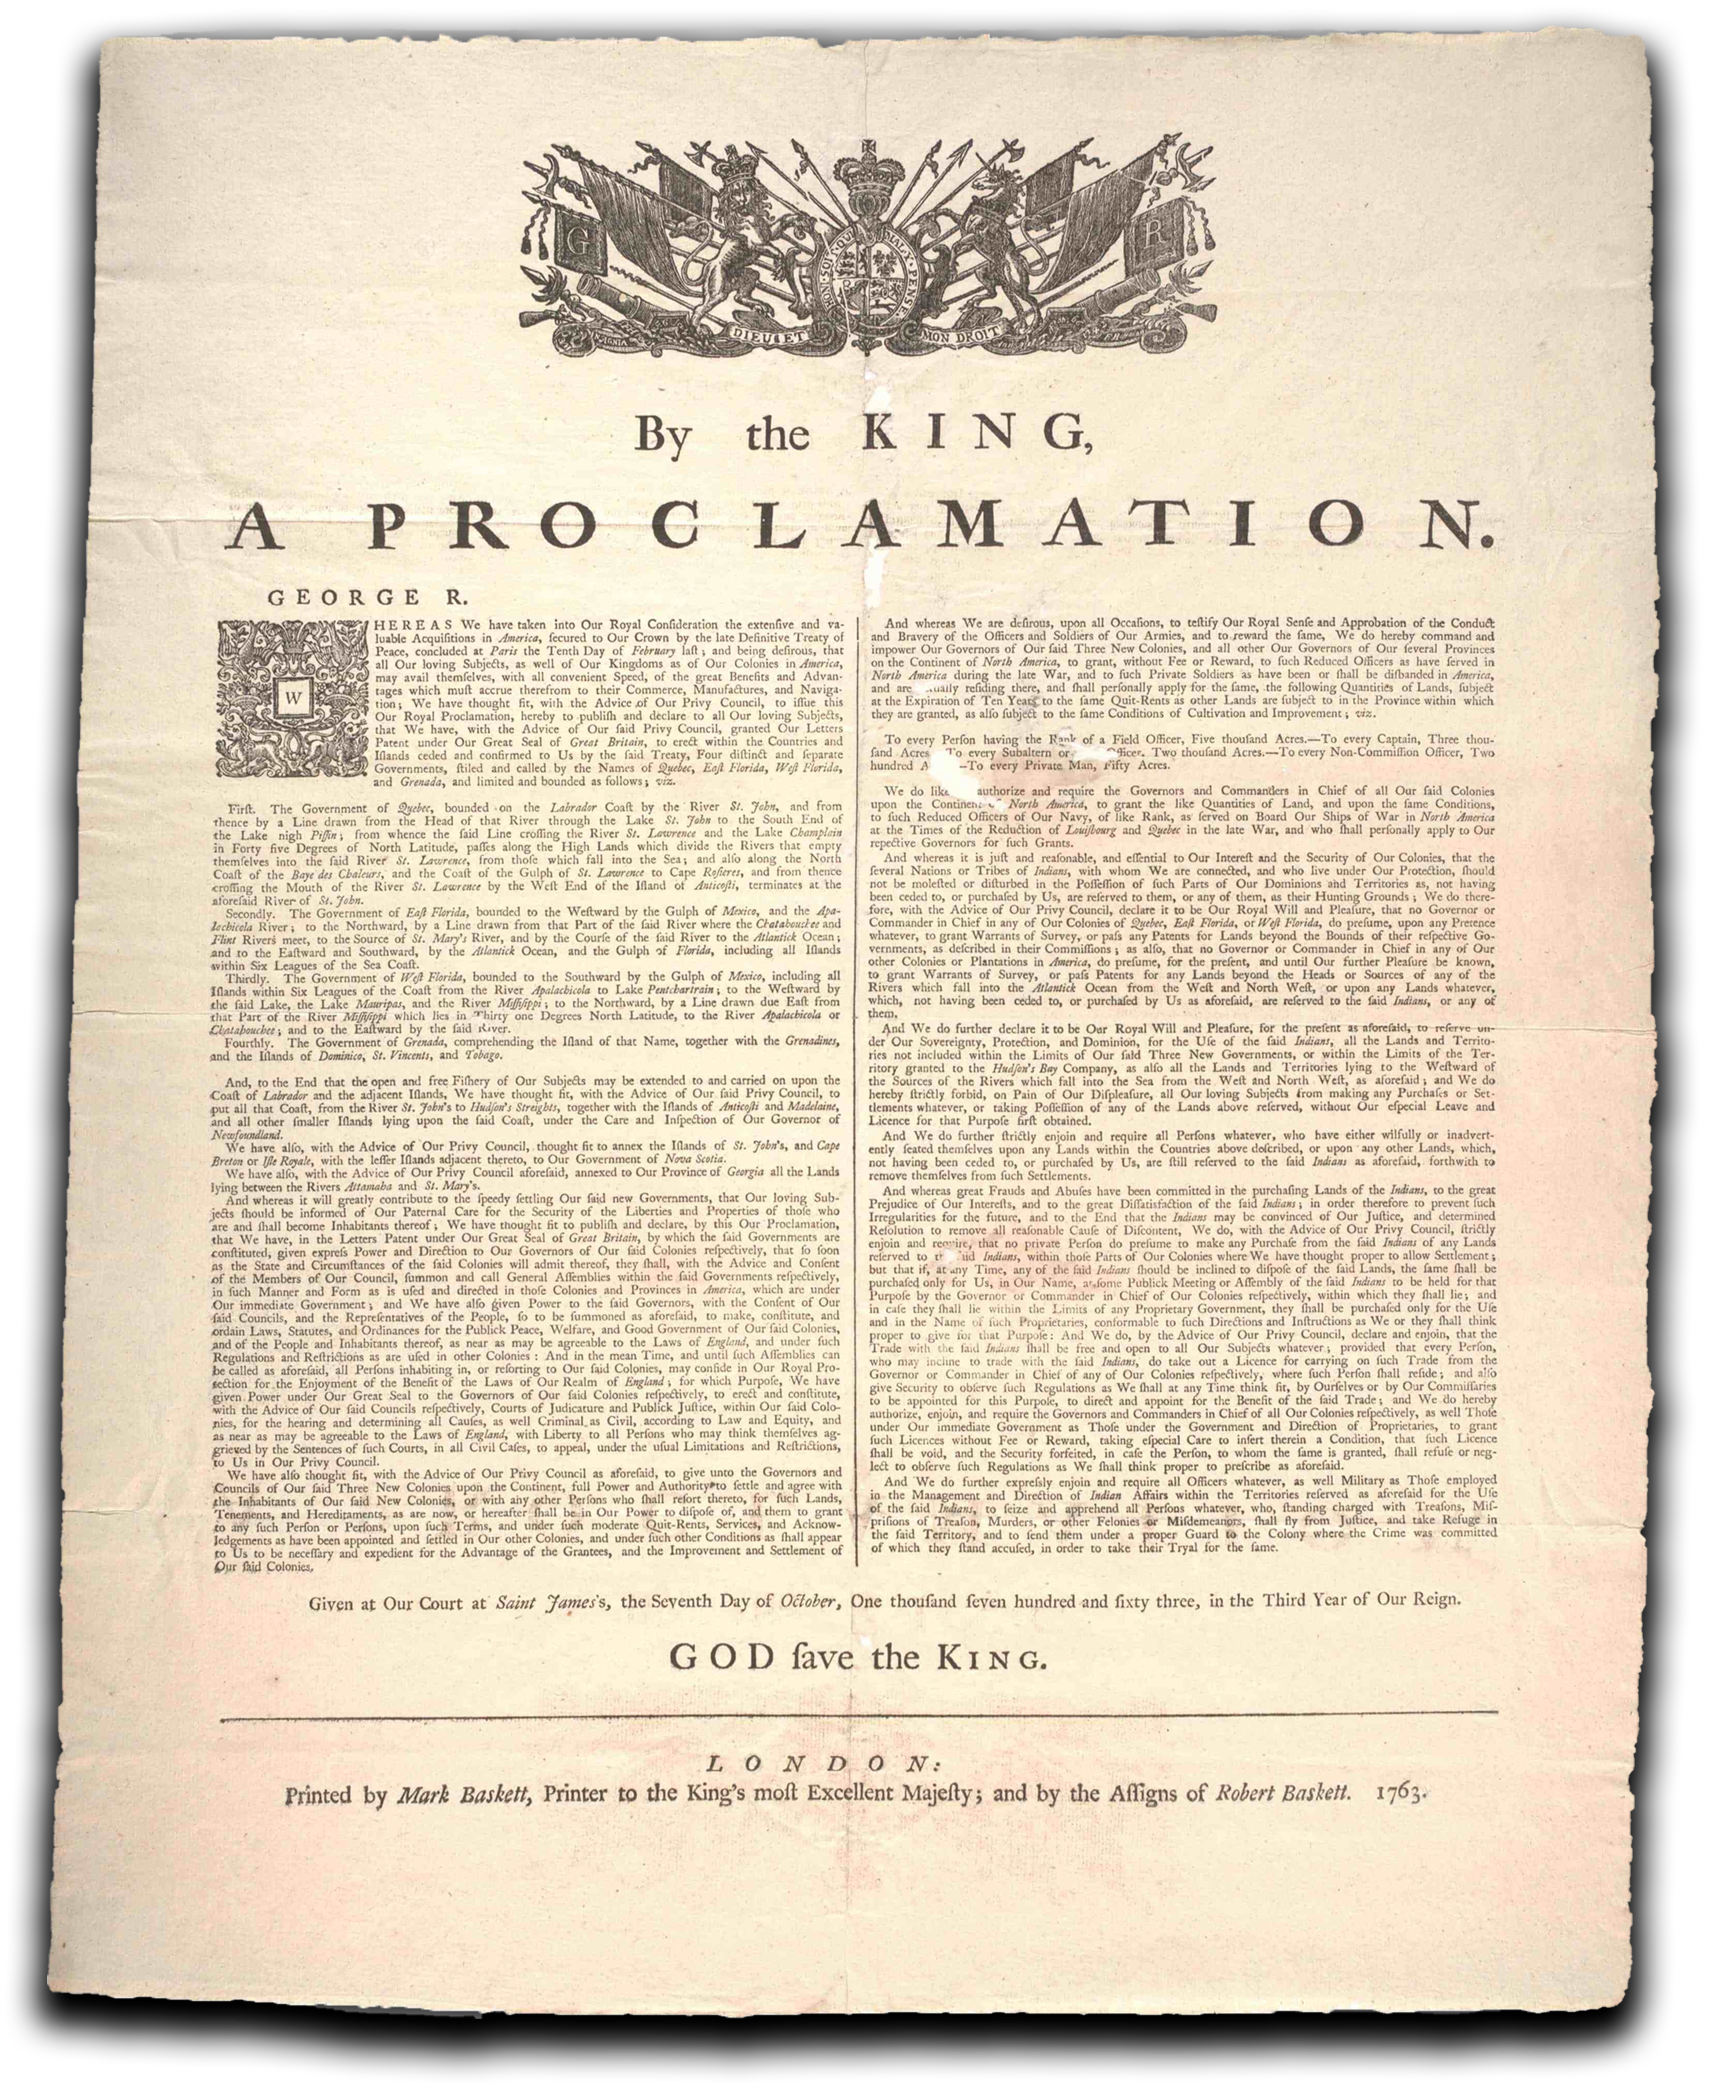 The Royal Proclamation of 1763 document- reads "By the KING, A PROCLAMATION"